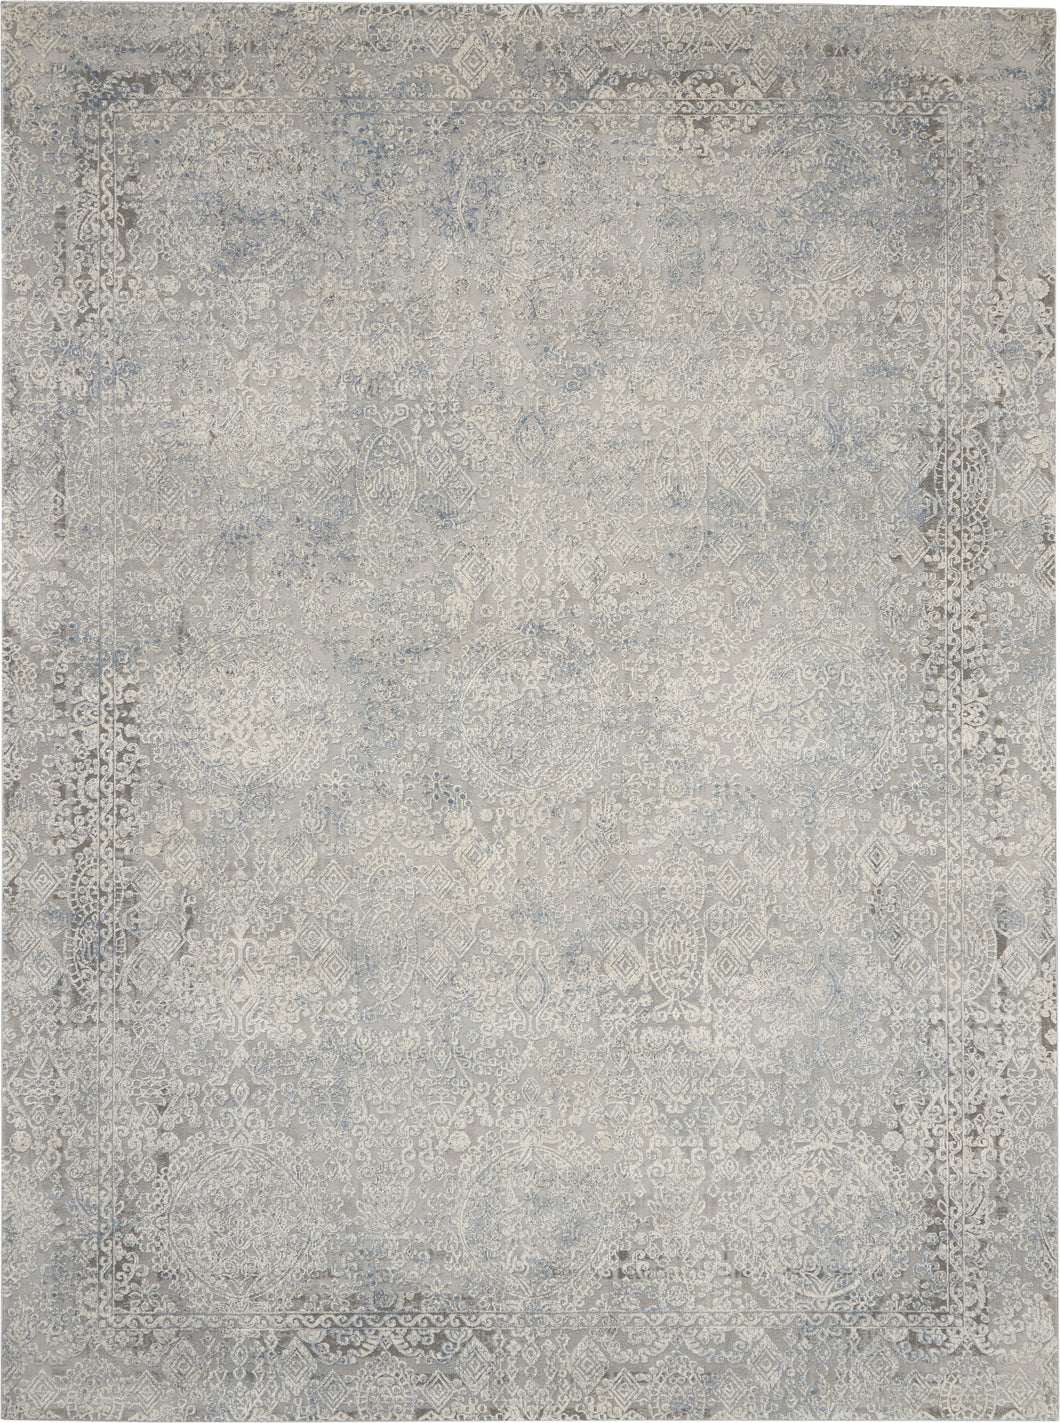 Nourison Rustic Textures 8' Round Area Rug RUS09 Ivory/Light Blue